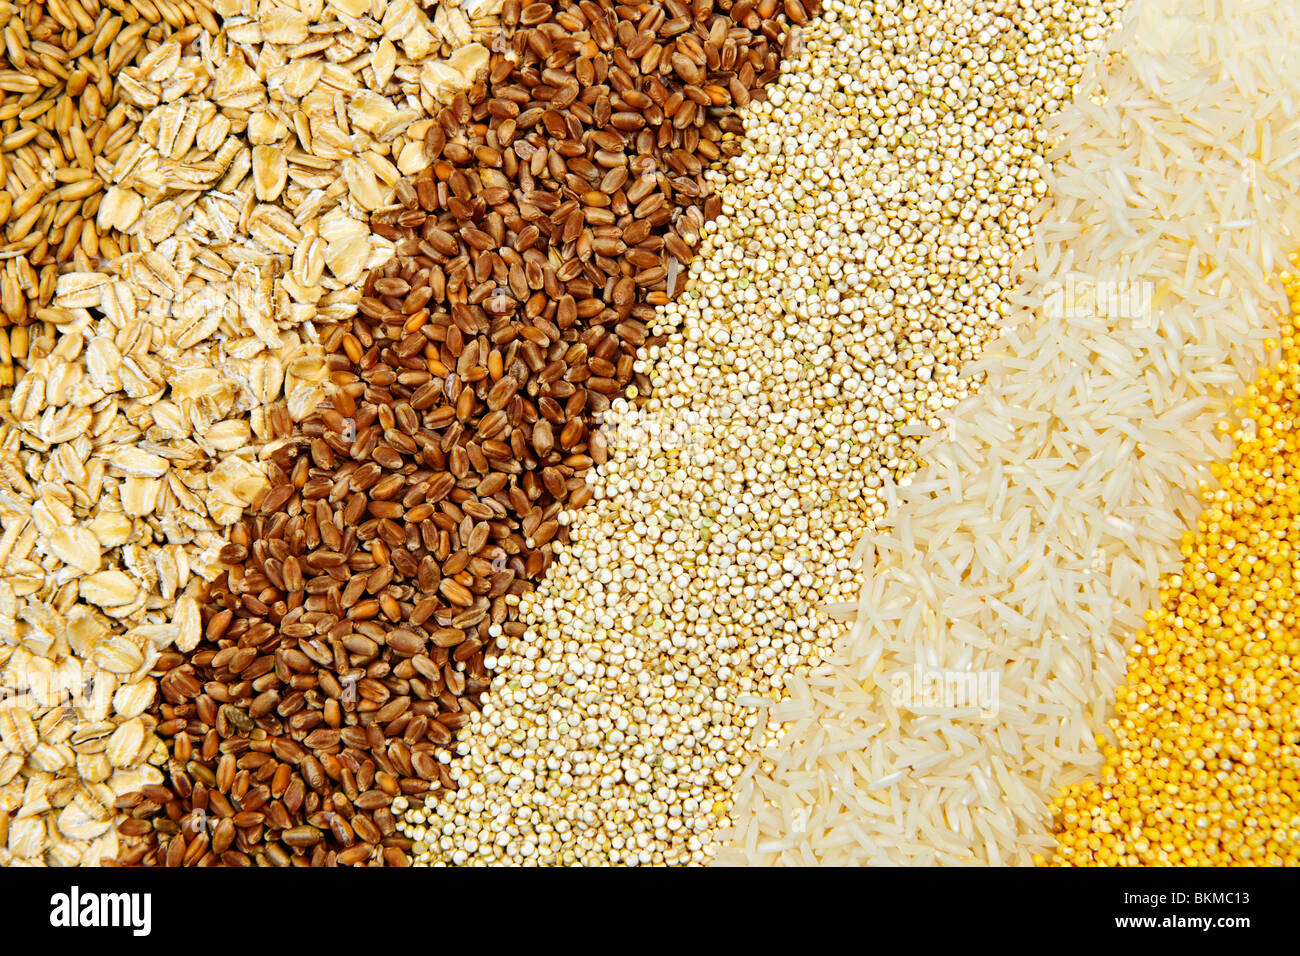 Background of different kinds of grains close up Stock Photo